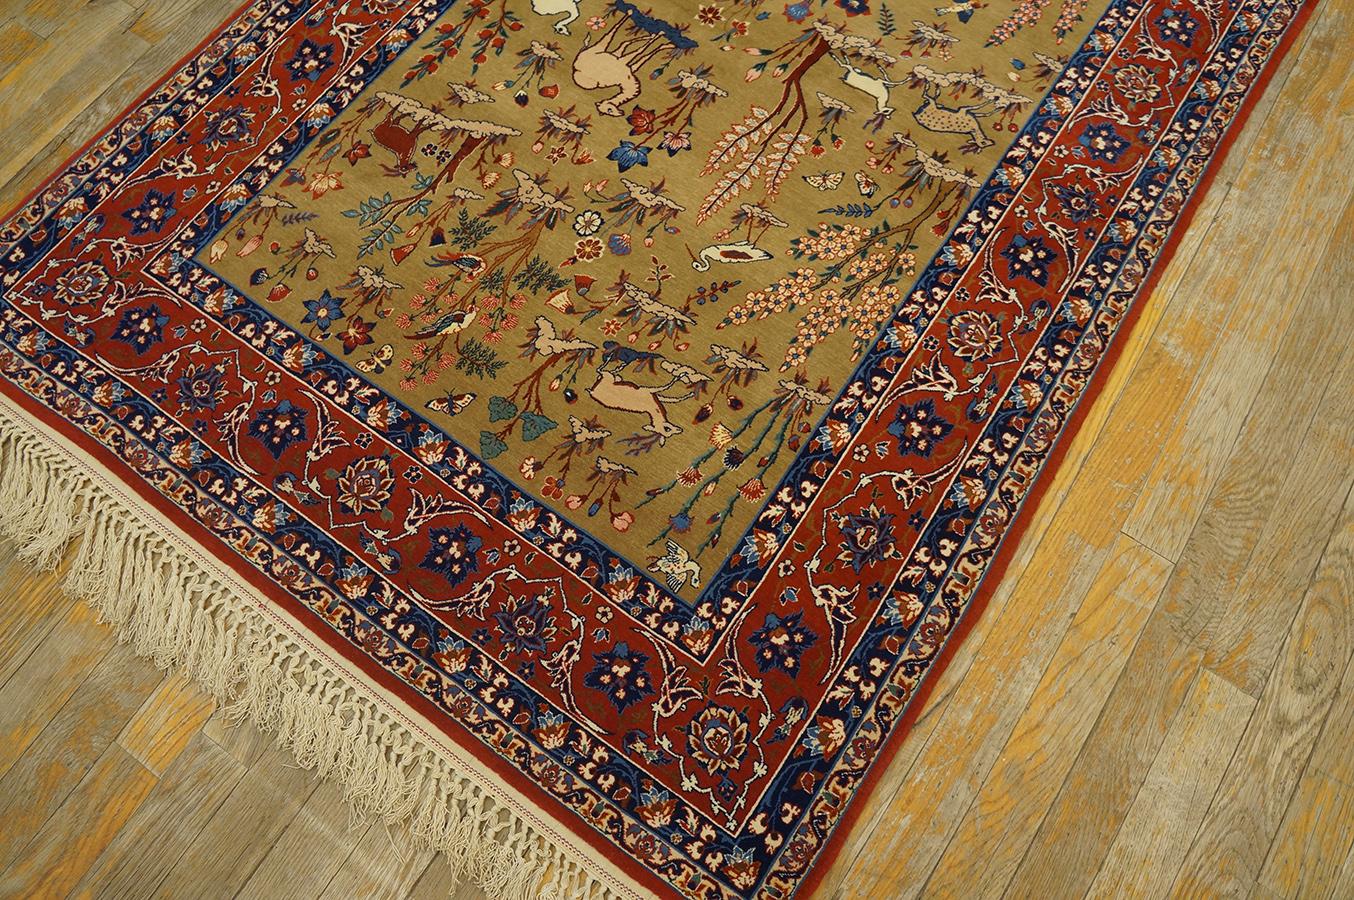 1930s Persian Isfahan Carpet ( 3' 4'' x 5' 2'' - 102 x 157 cm ) For Sale 2